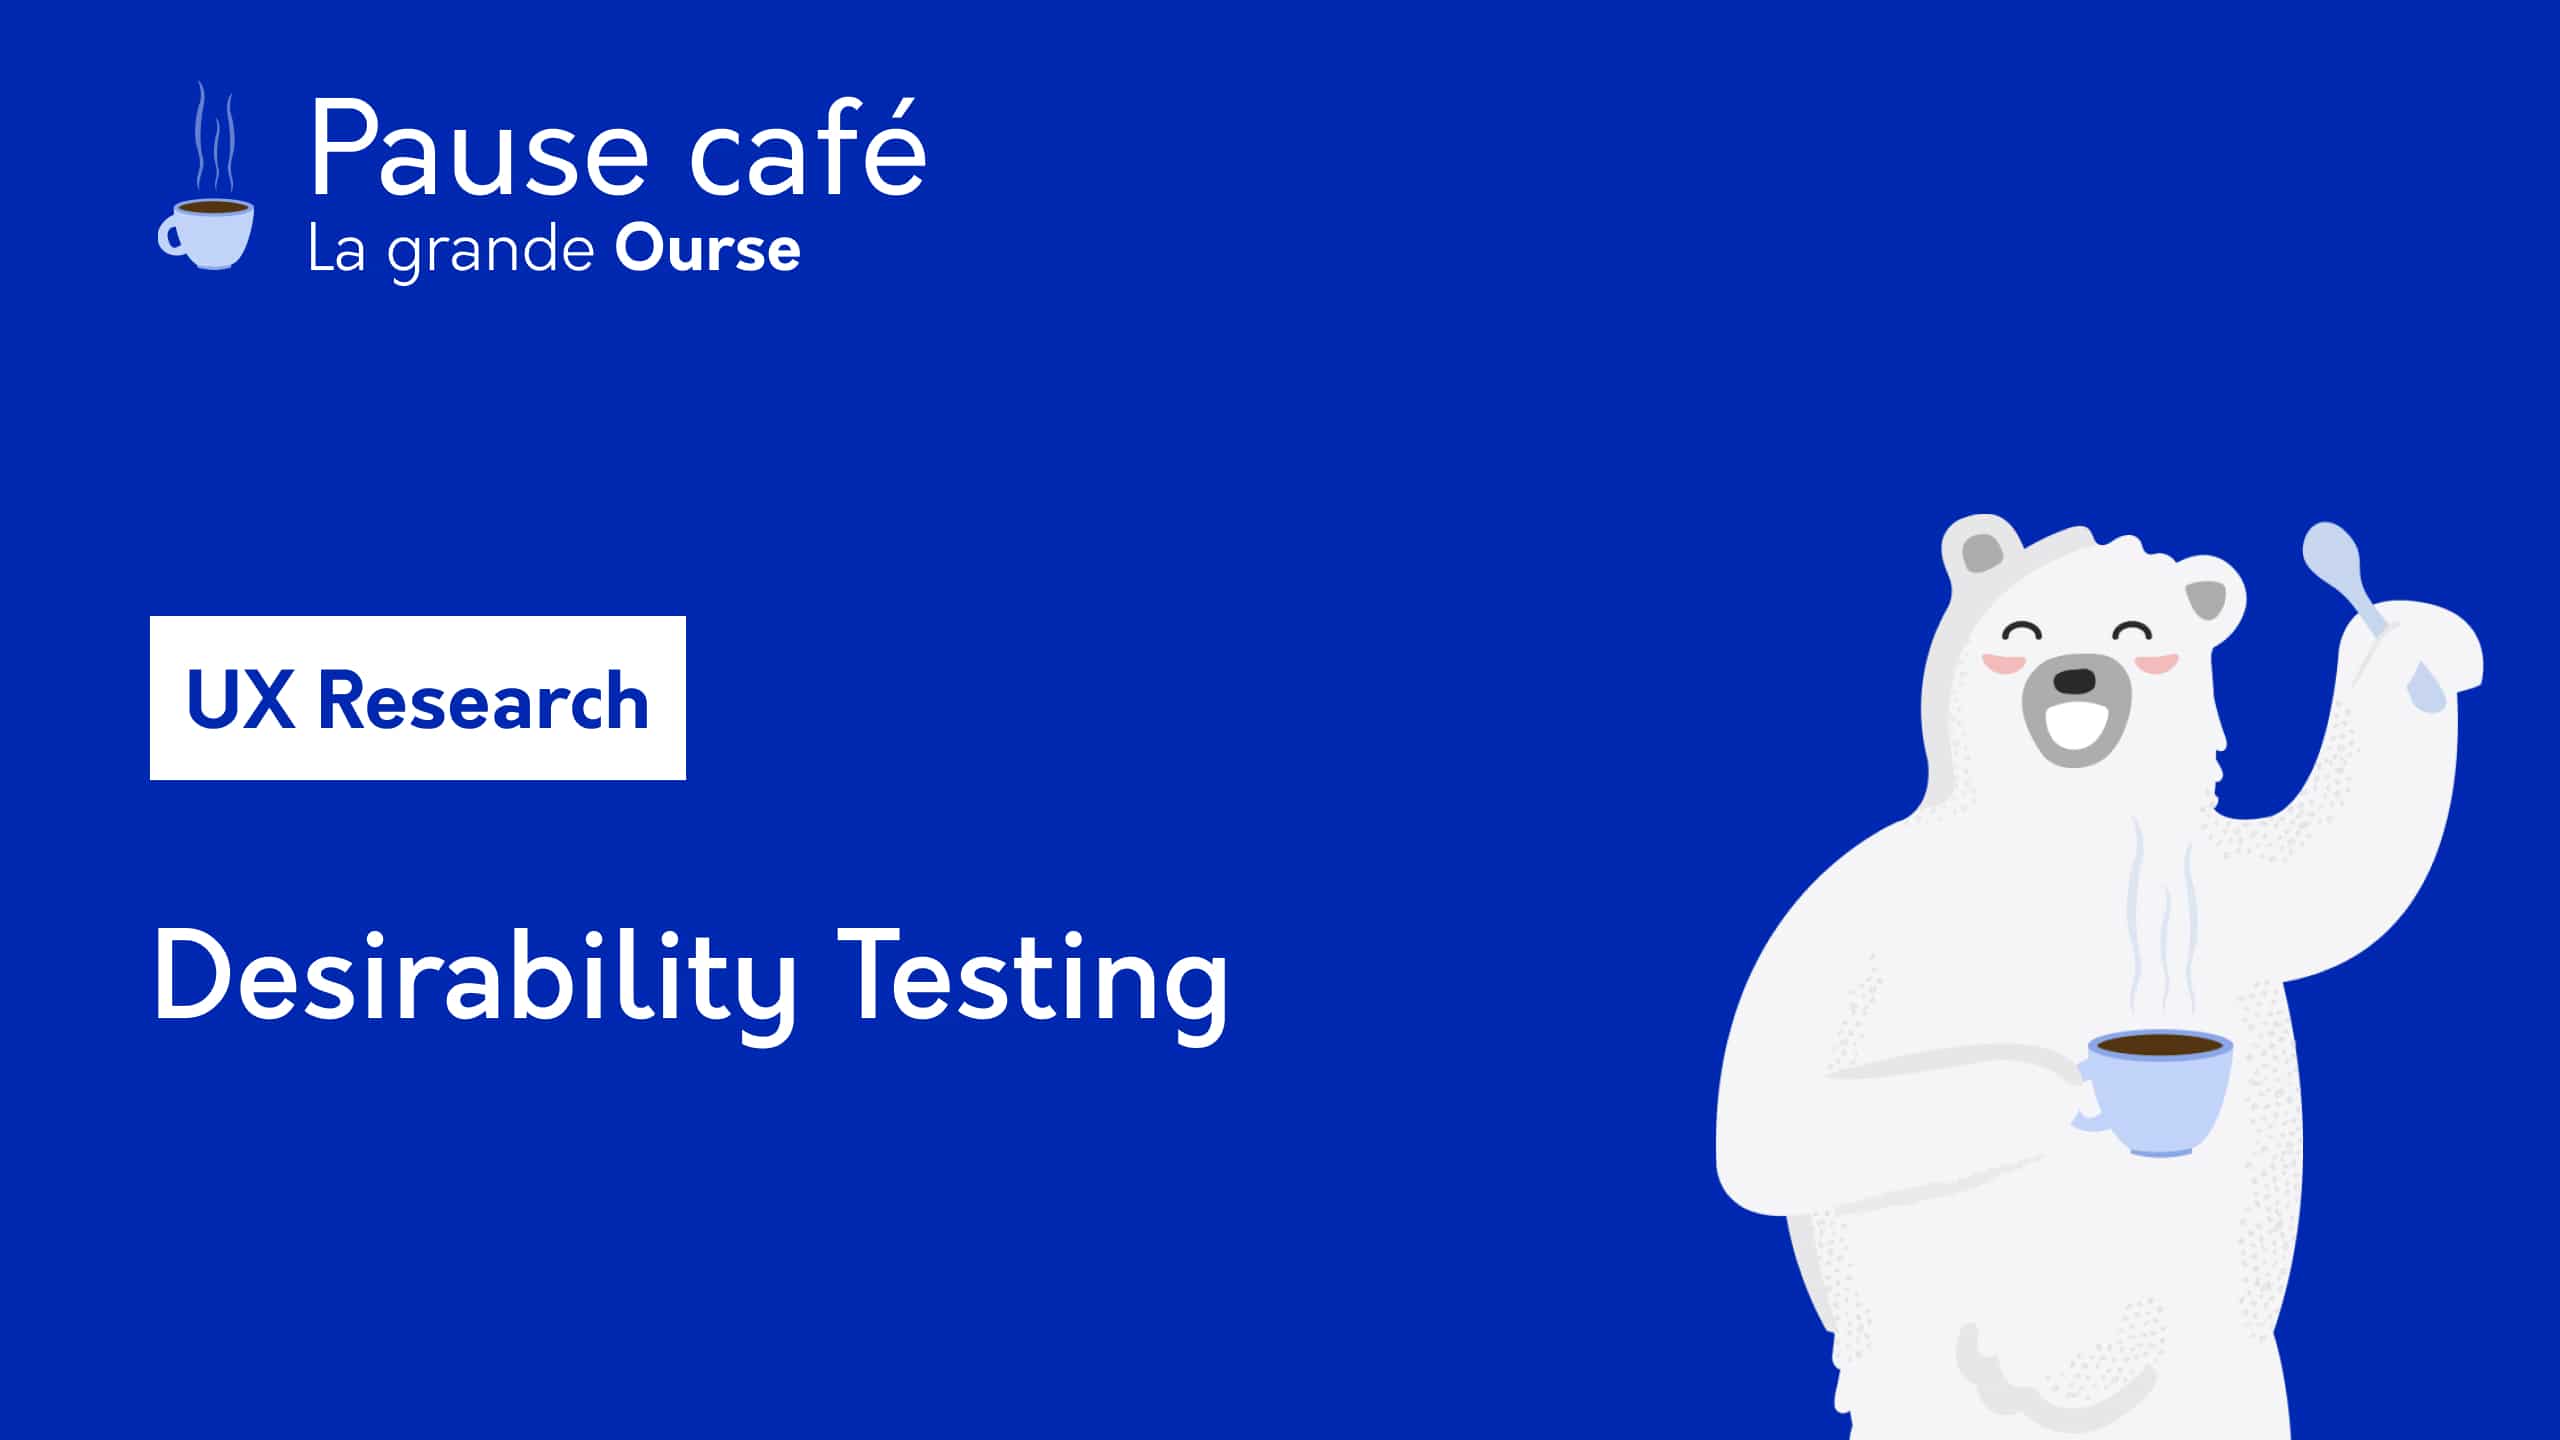 Pause café - UX Research - Desirability Testing